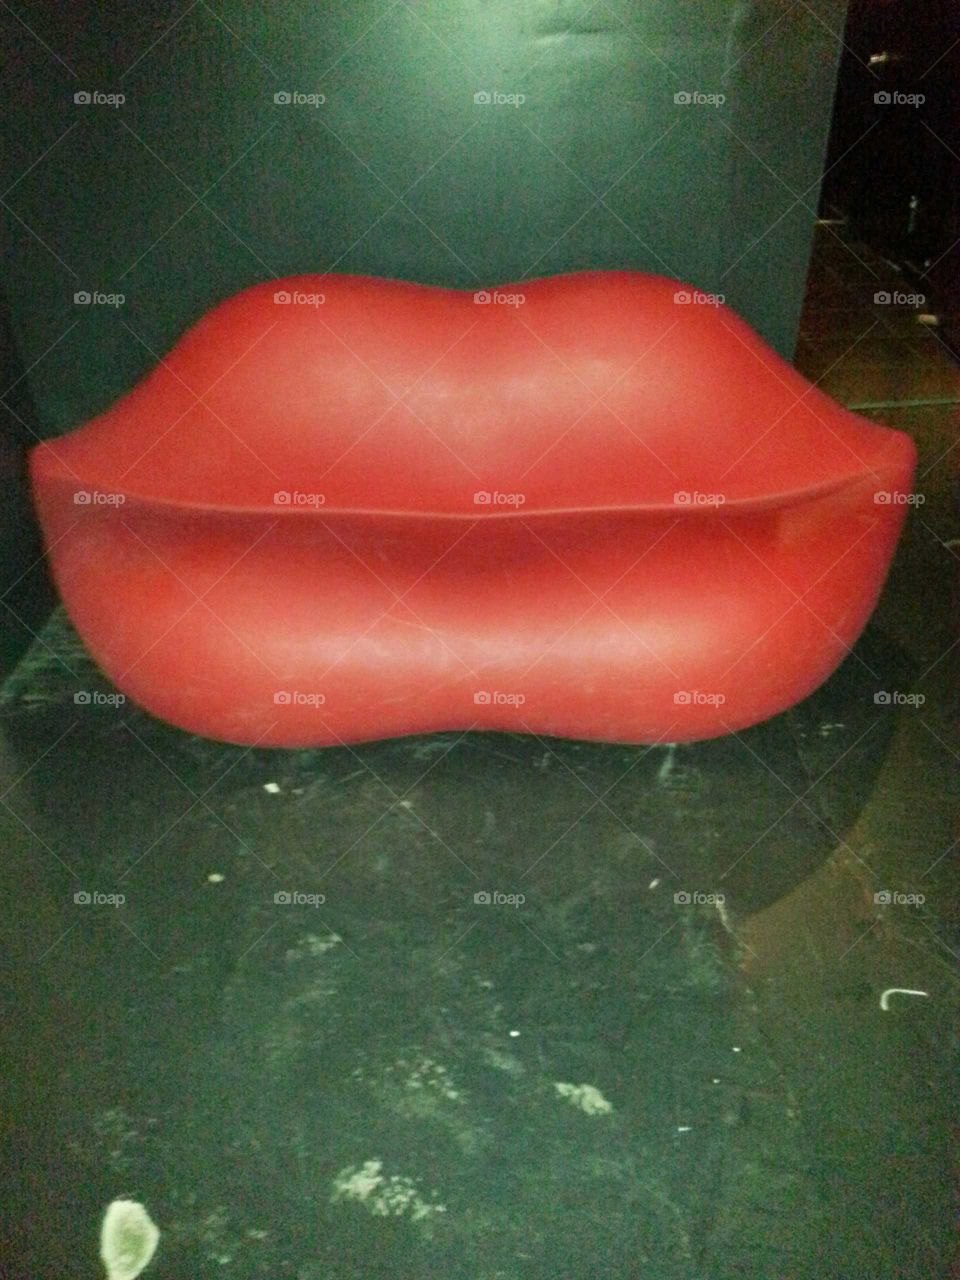 A big pair of red lips; actually a sofa!